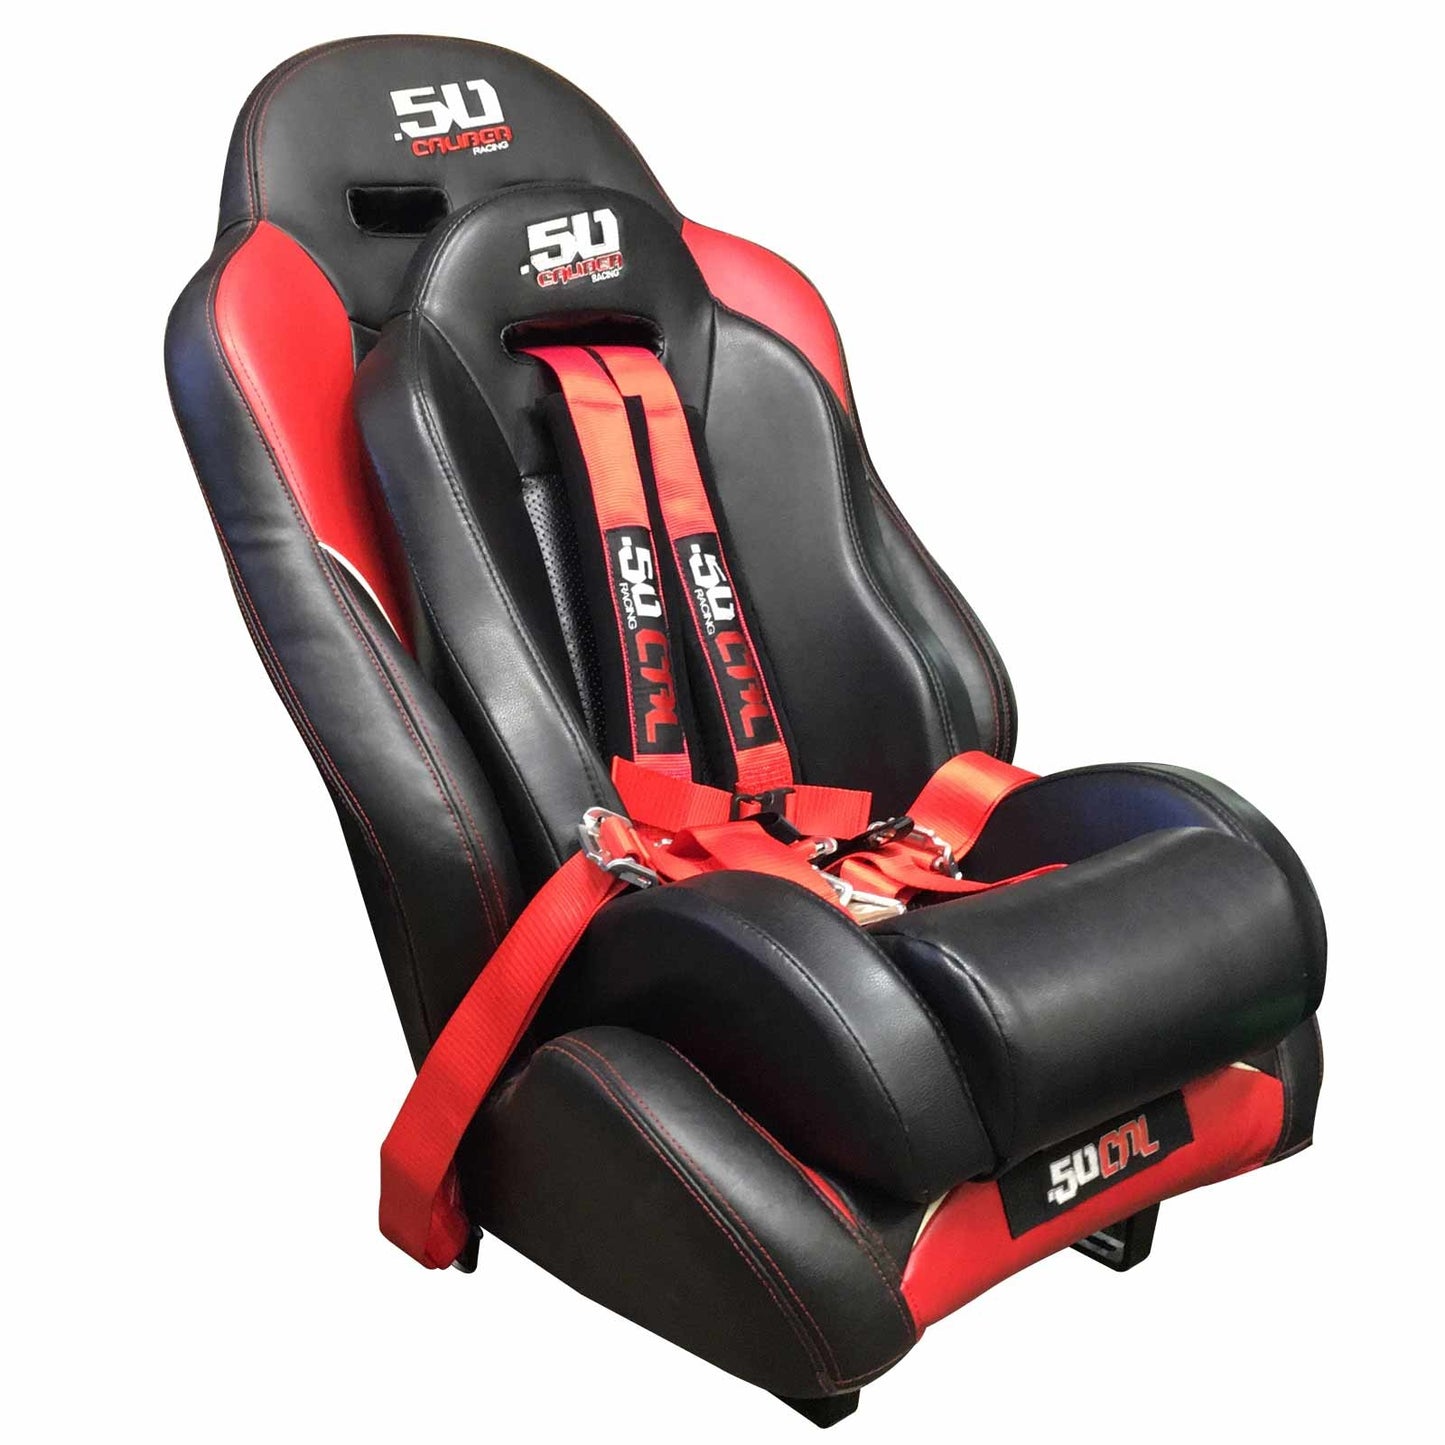 50 Caliber Racing Off-Road Child Booster Seat